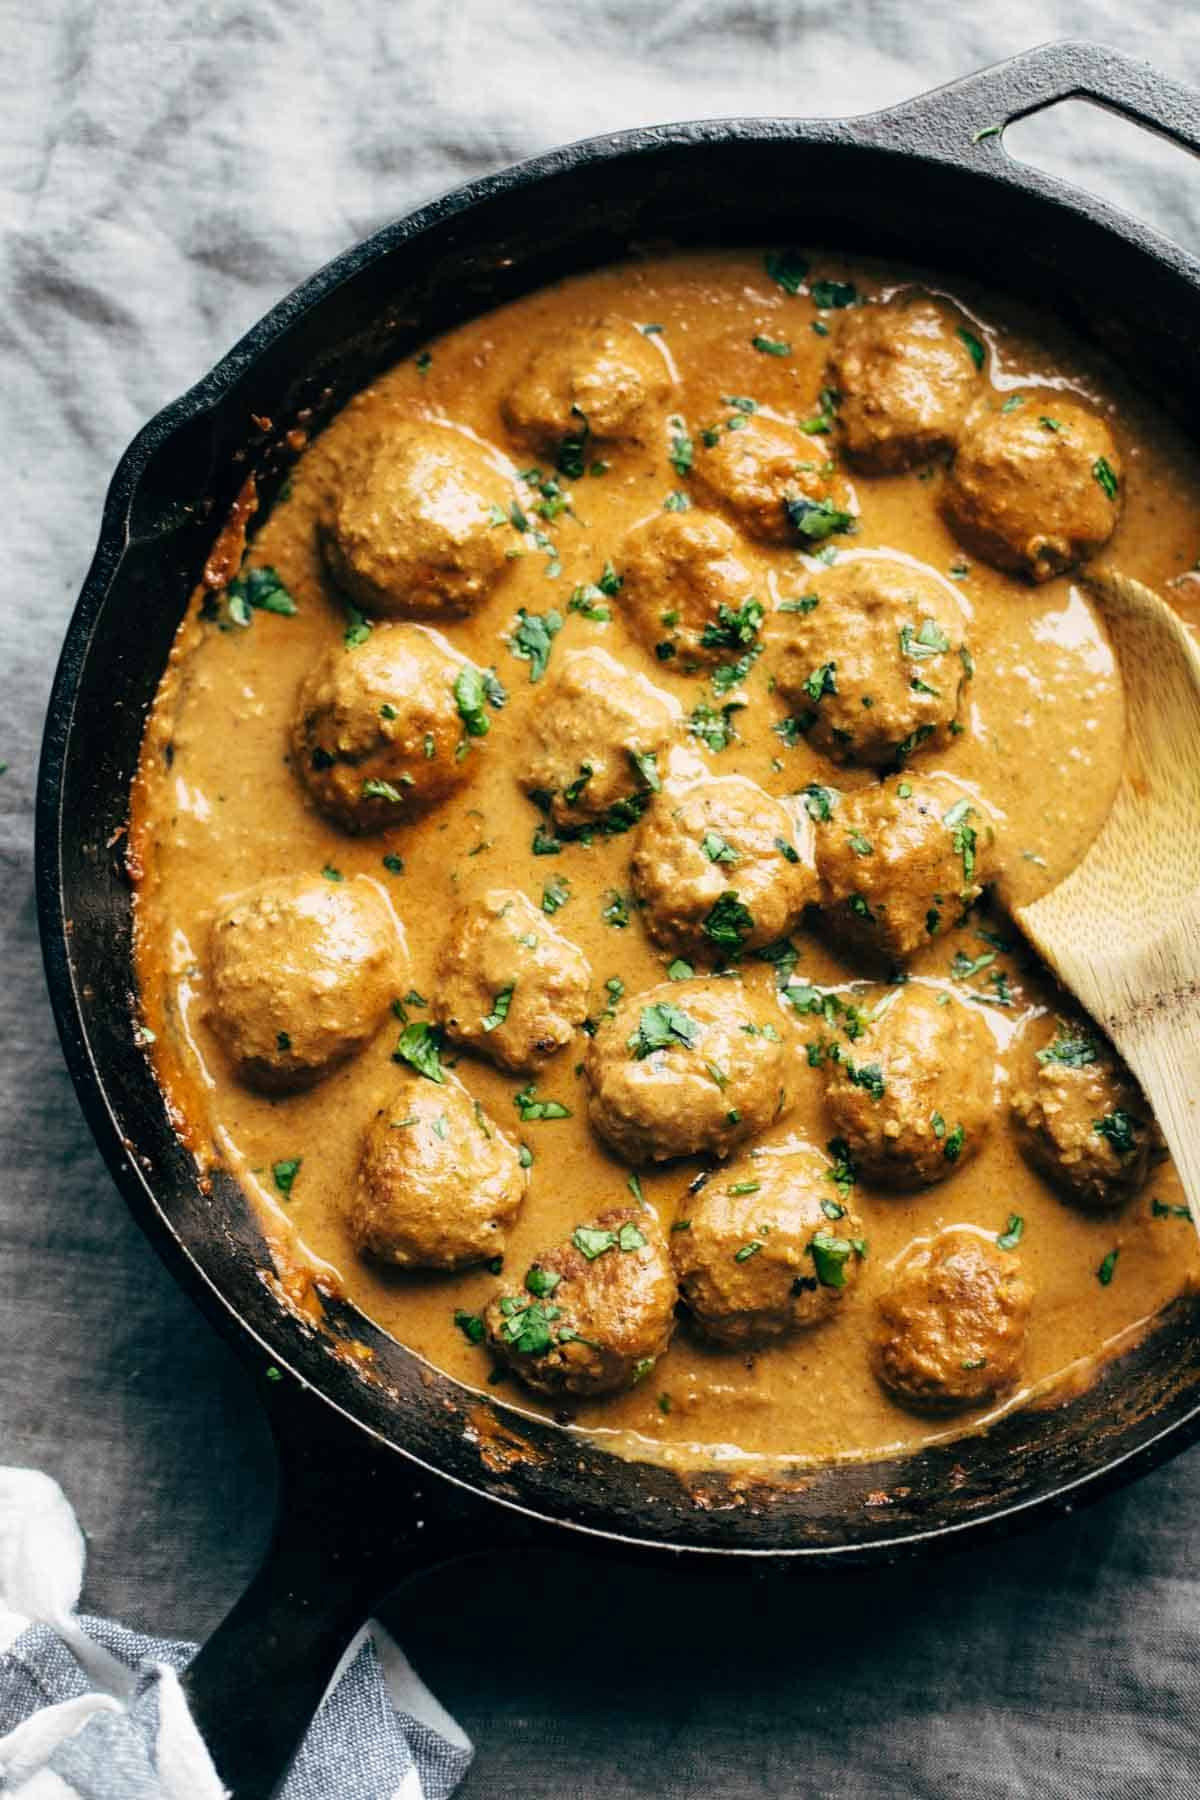 Top 15 Vegetarian Meatball Recipes
 Of All Time